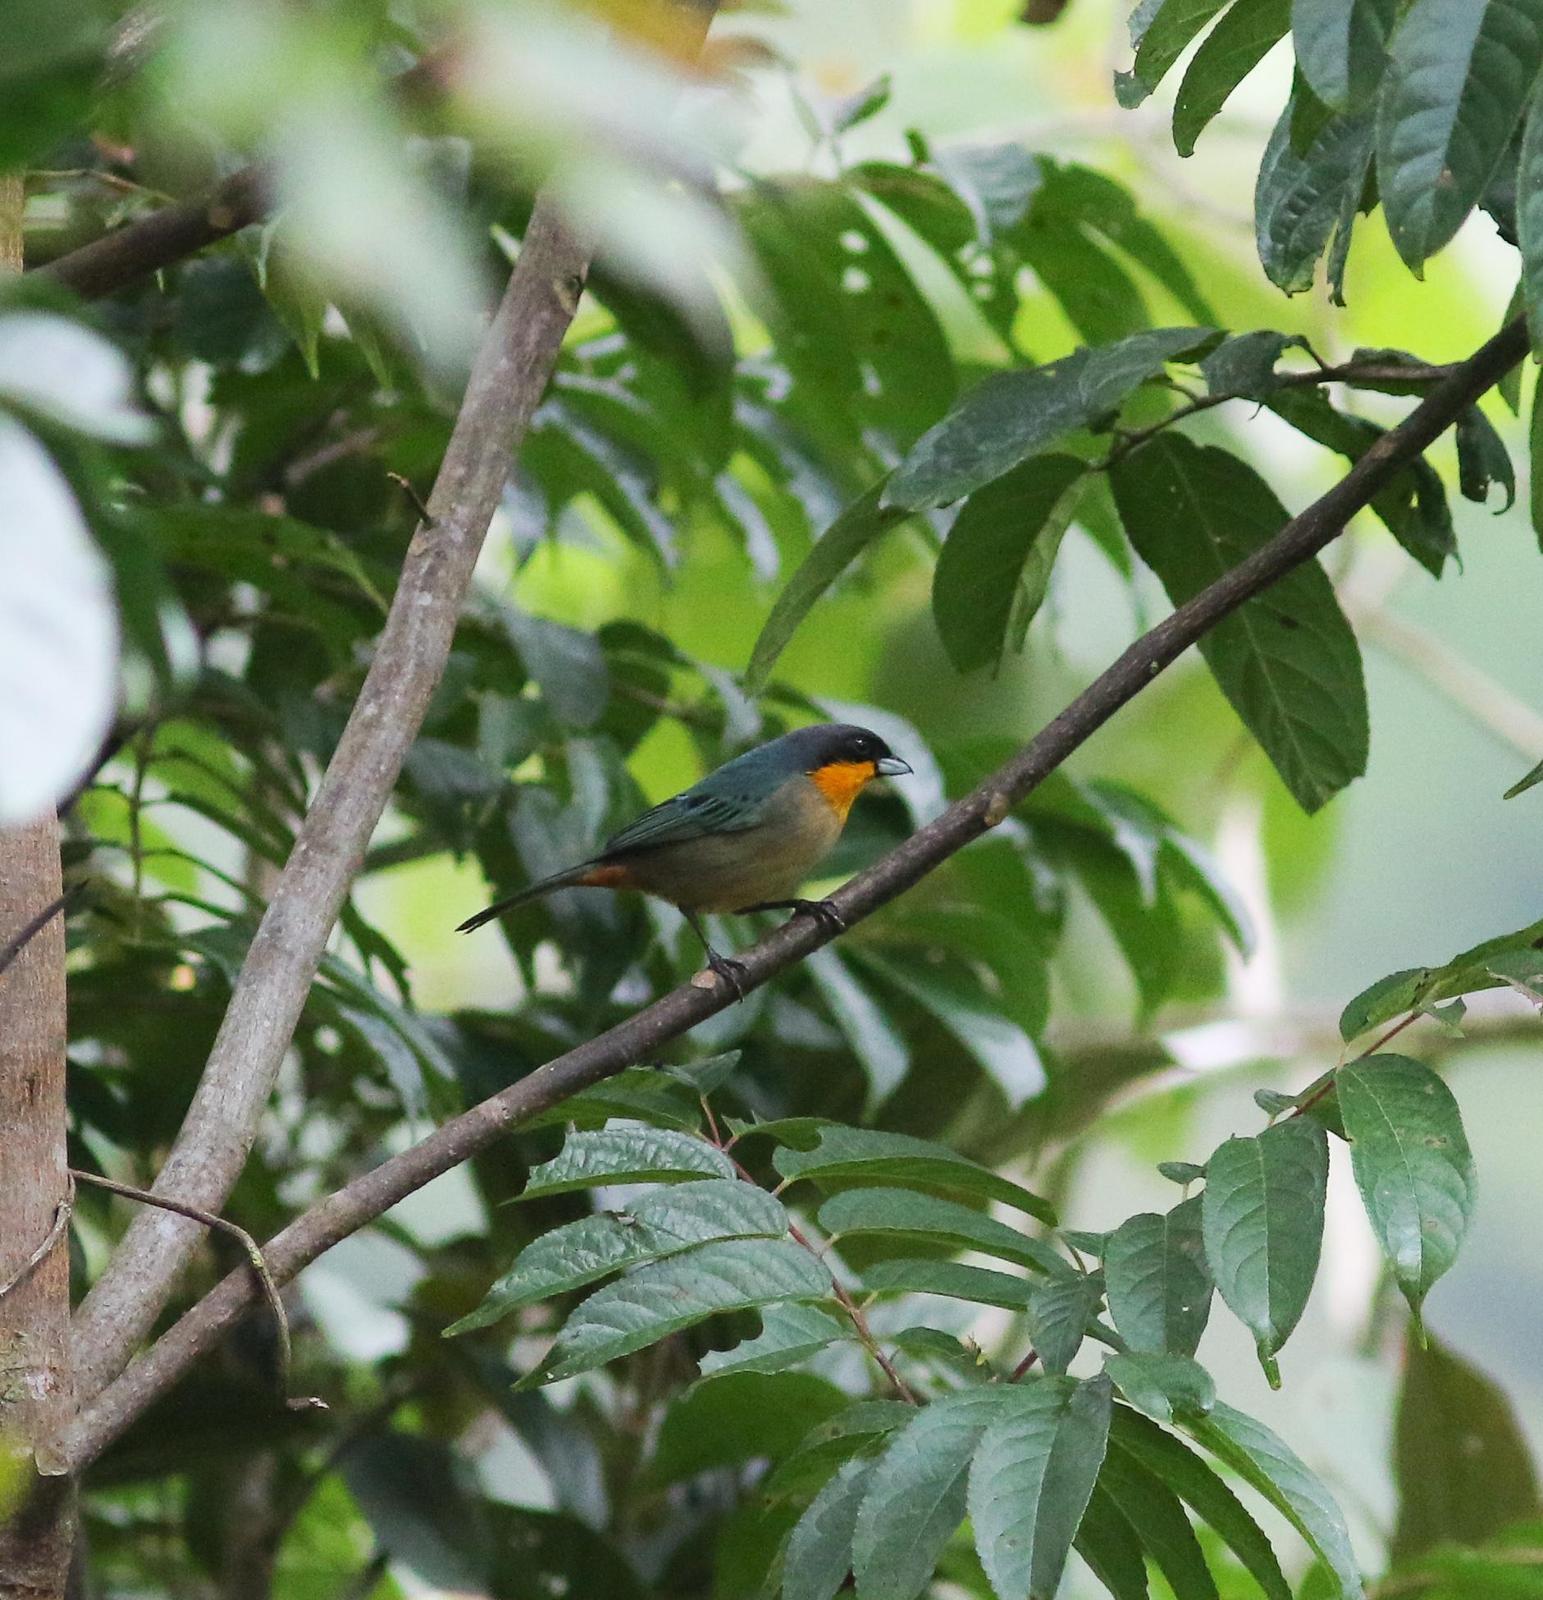 Yellow-throated Tanager Photo by Leonardo Garrigues